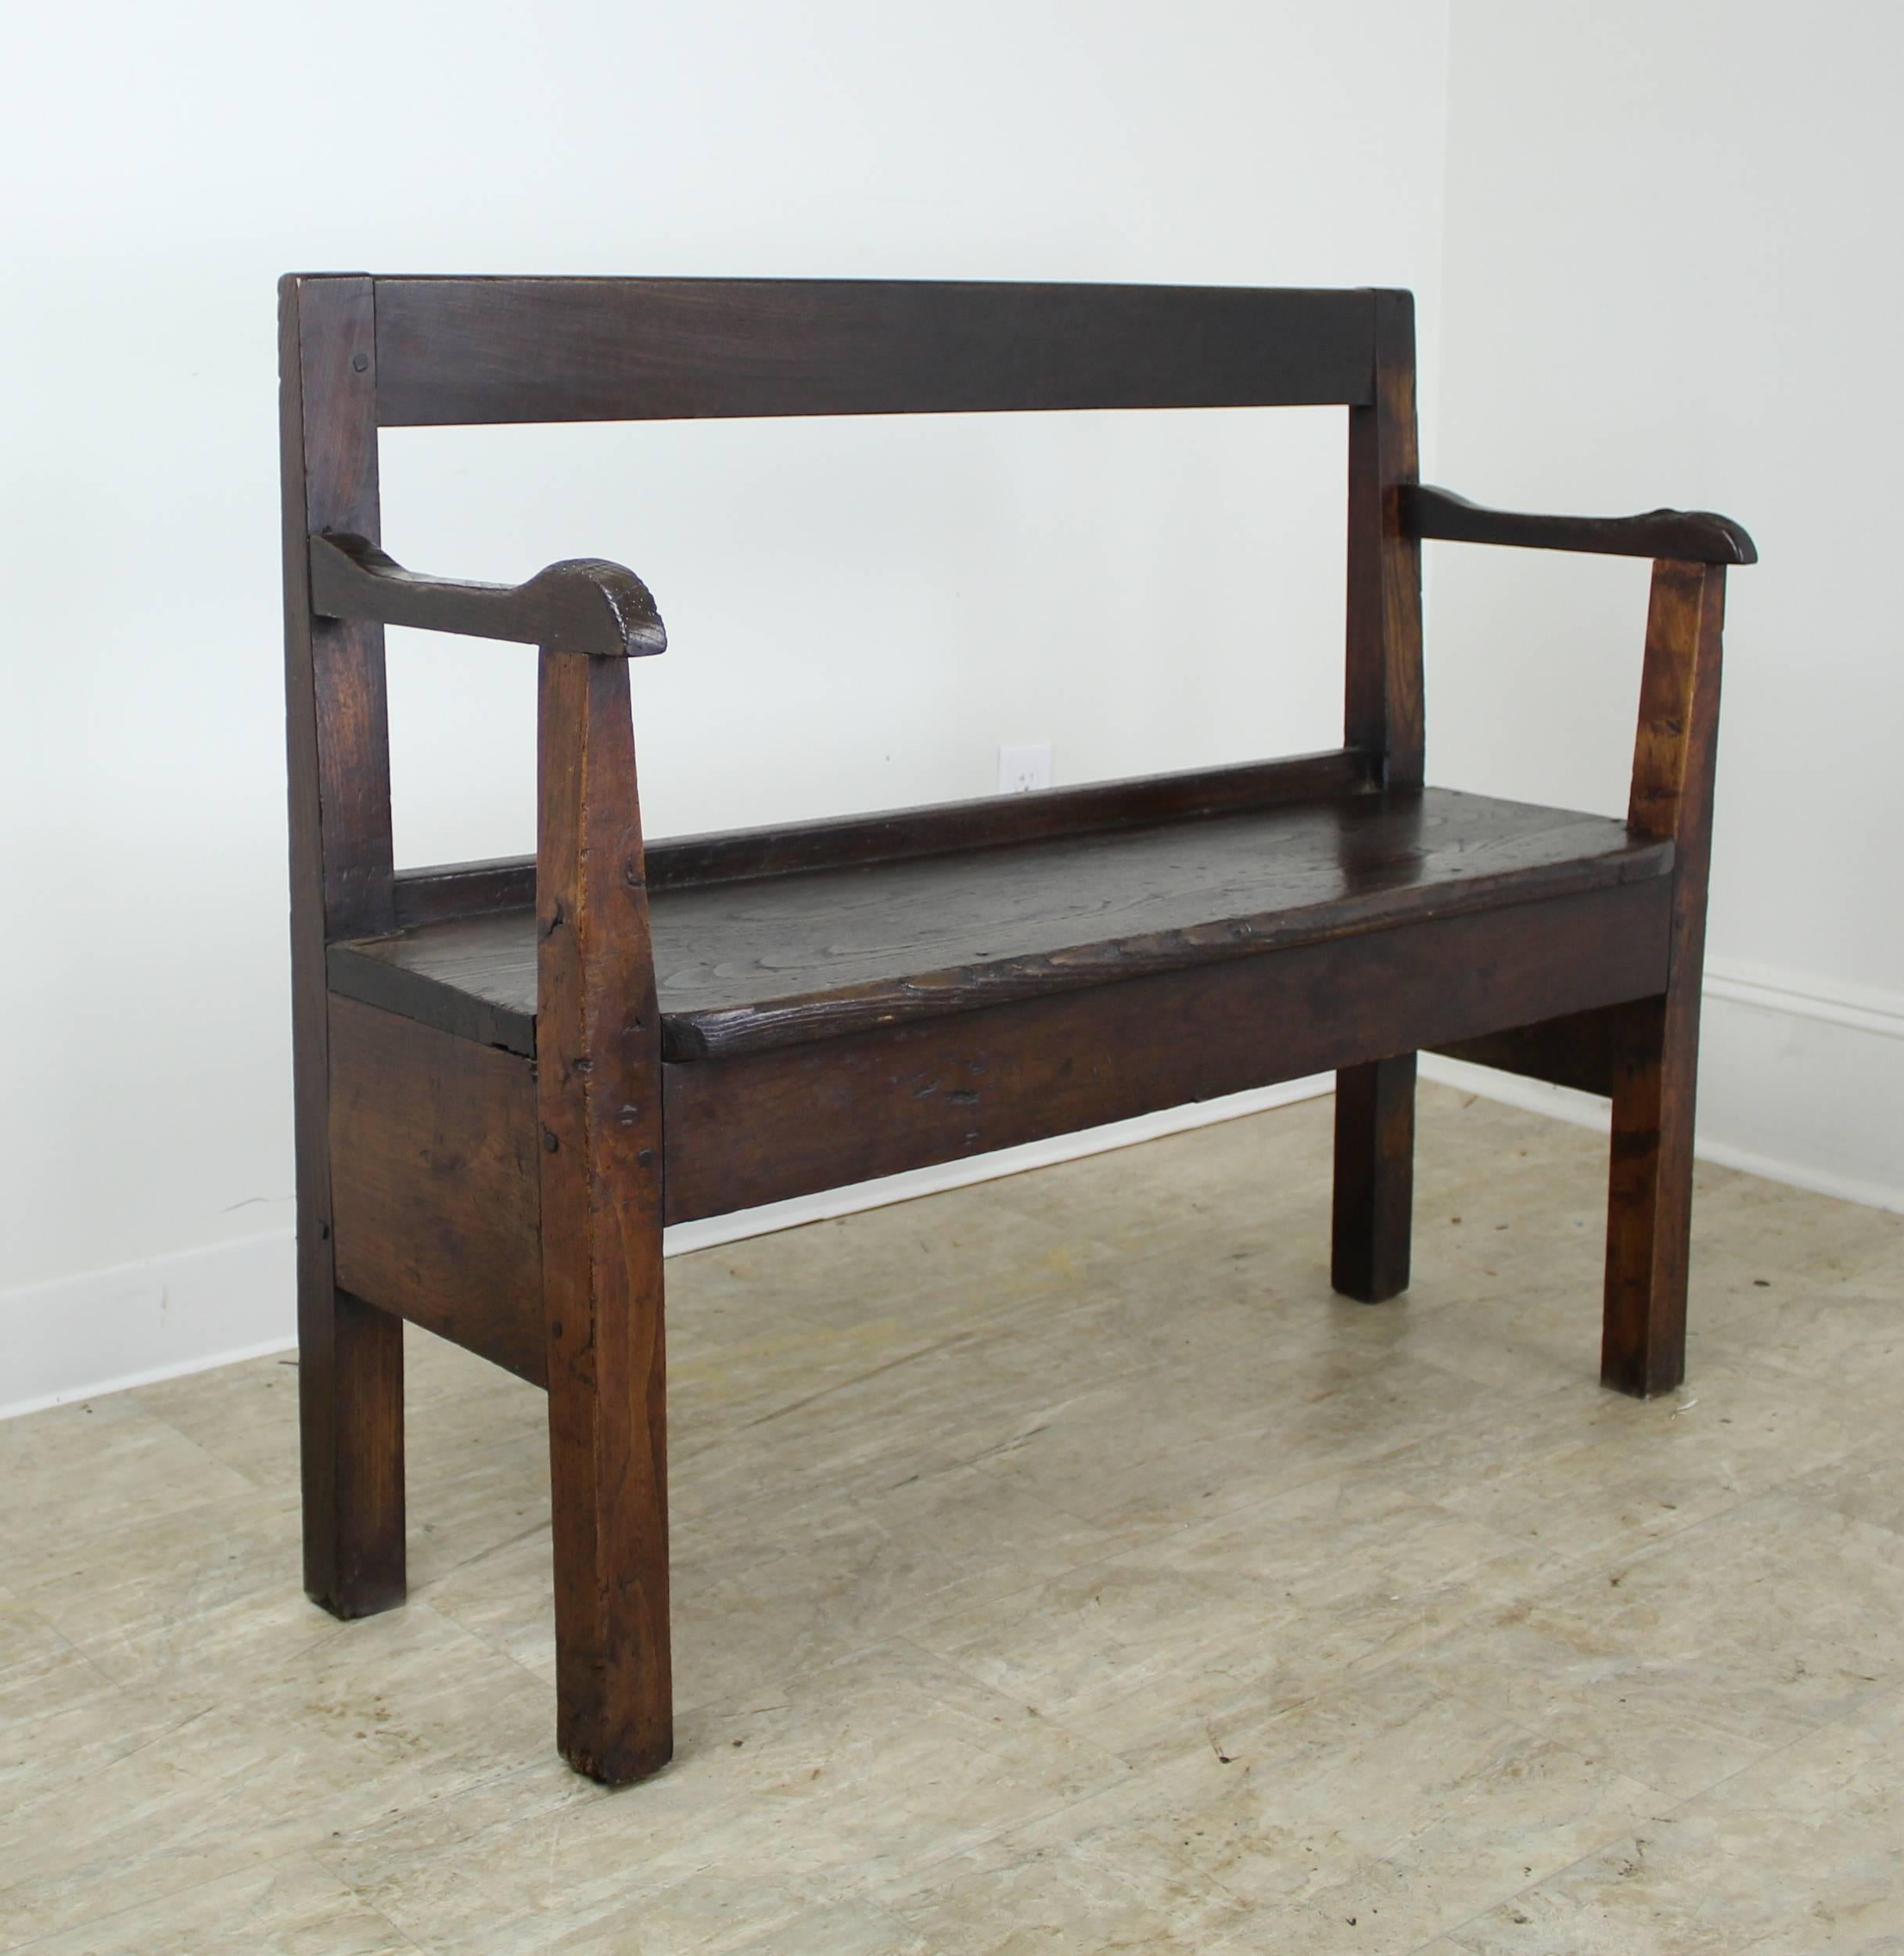 A very nice, rustic, sturdy bench, often found near the fireside. This piece has an open back and nice distress. Terrific deep color and patina. Well shaped arms offer a sweet design note.